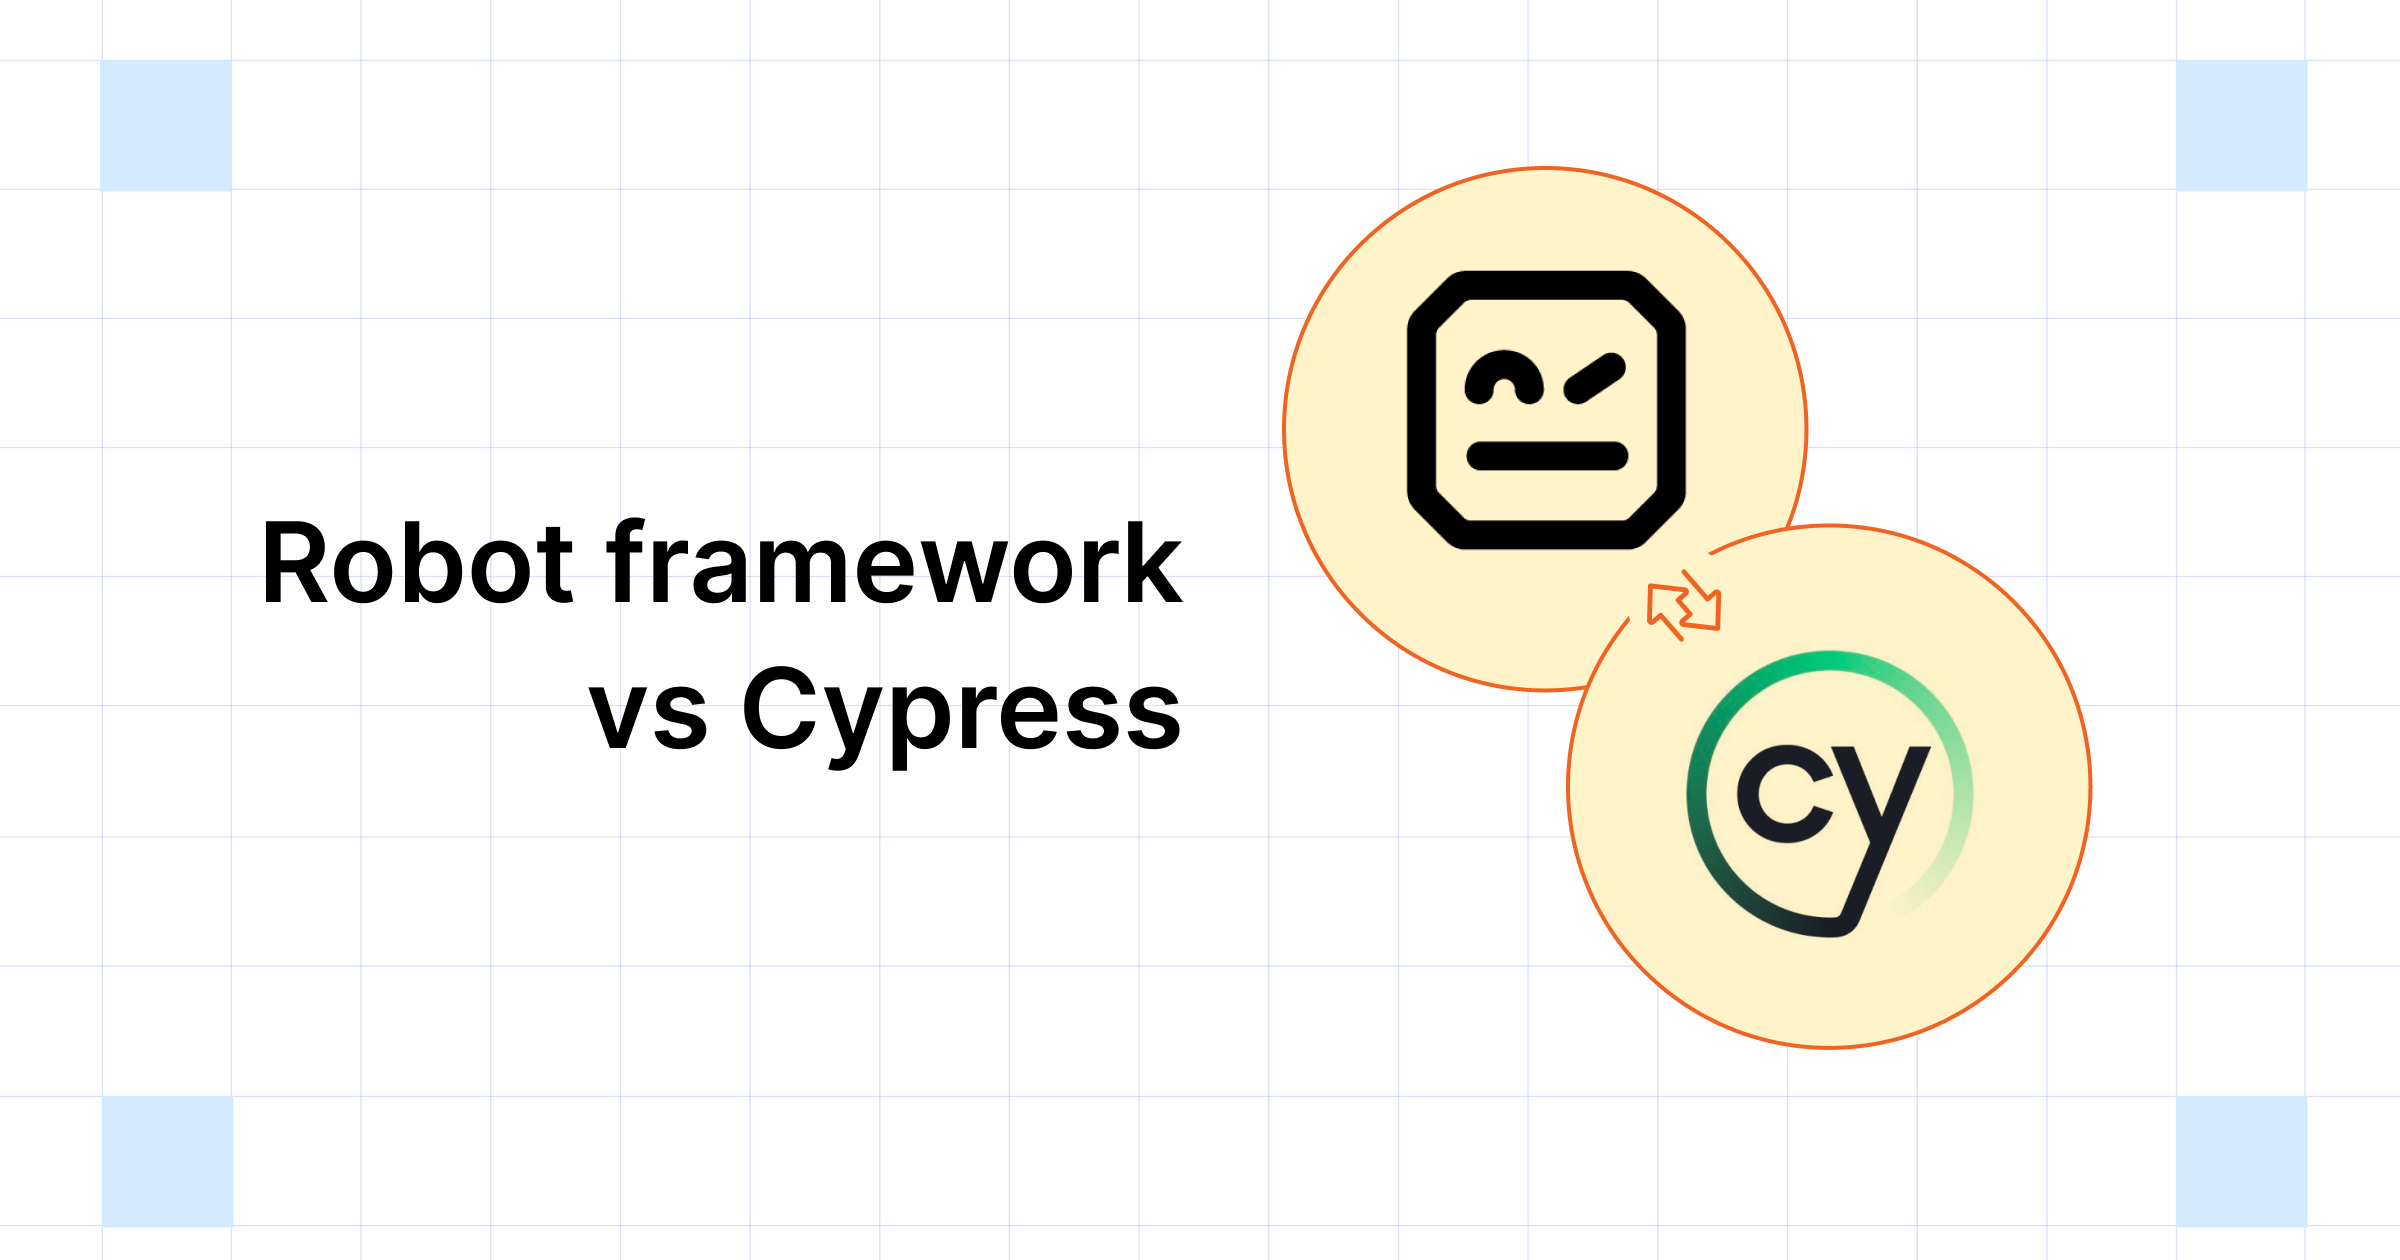 Robot framework vs Cypress - What are the Differences